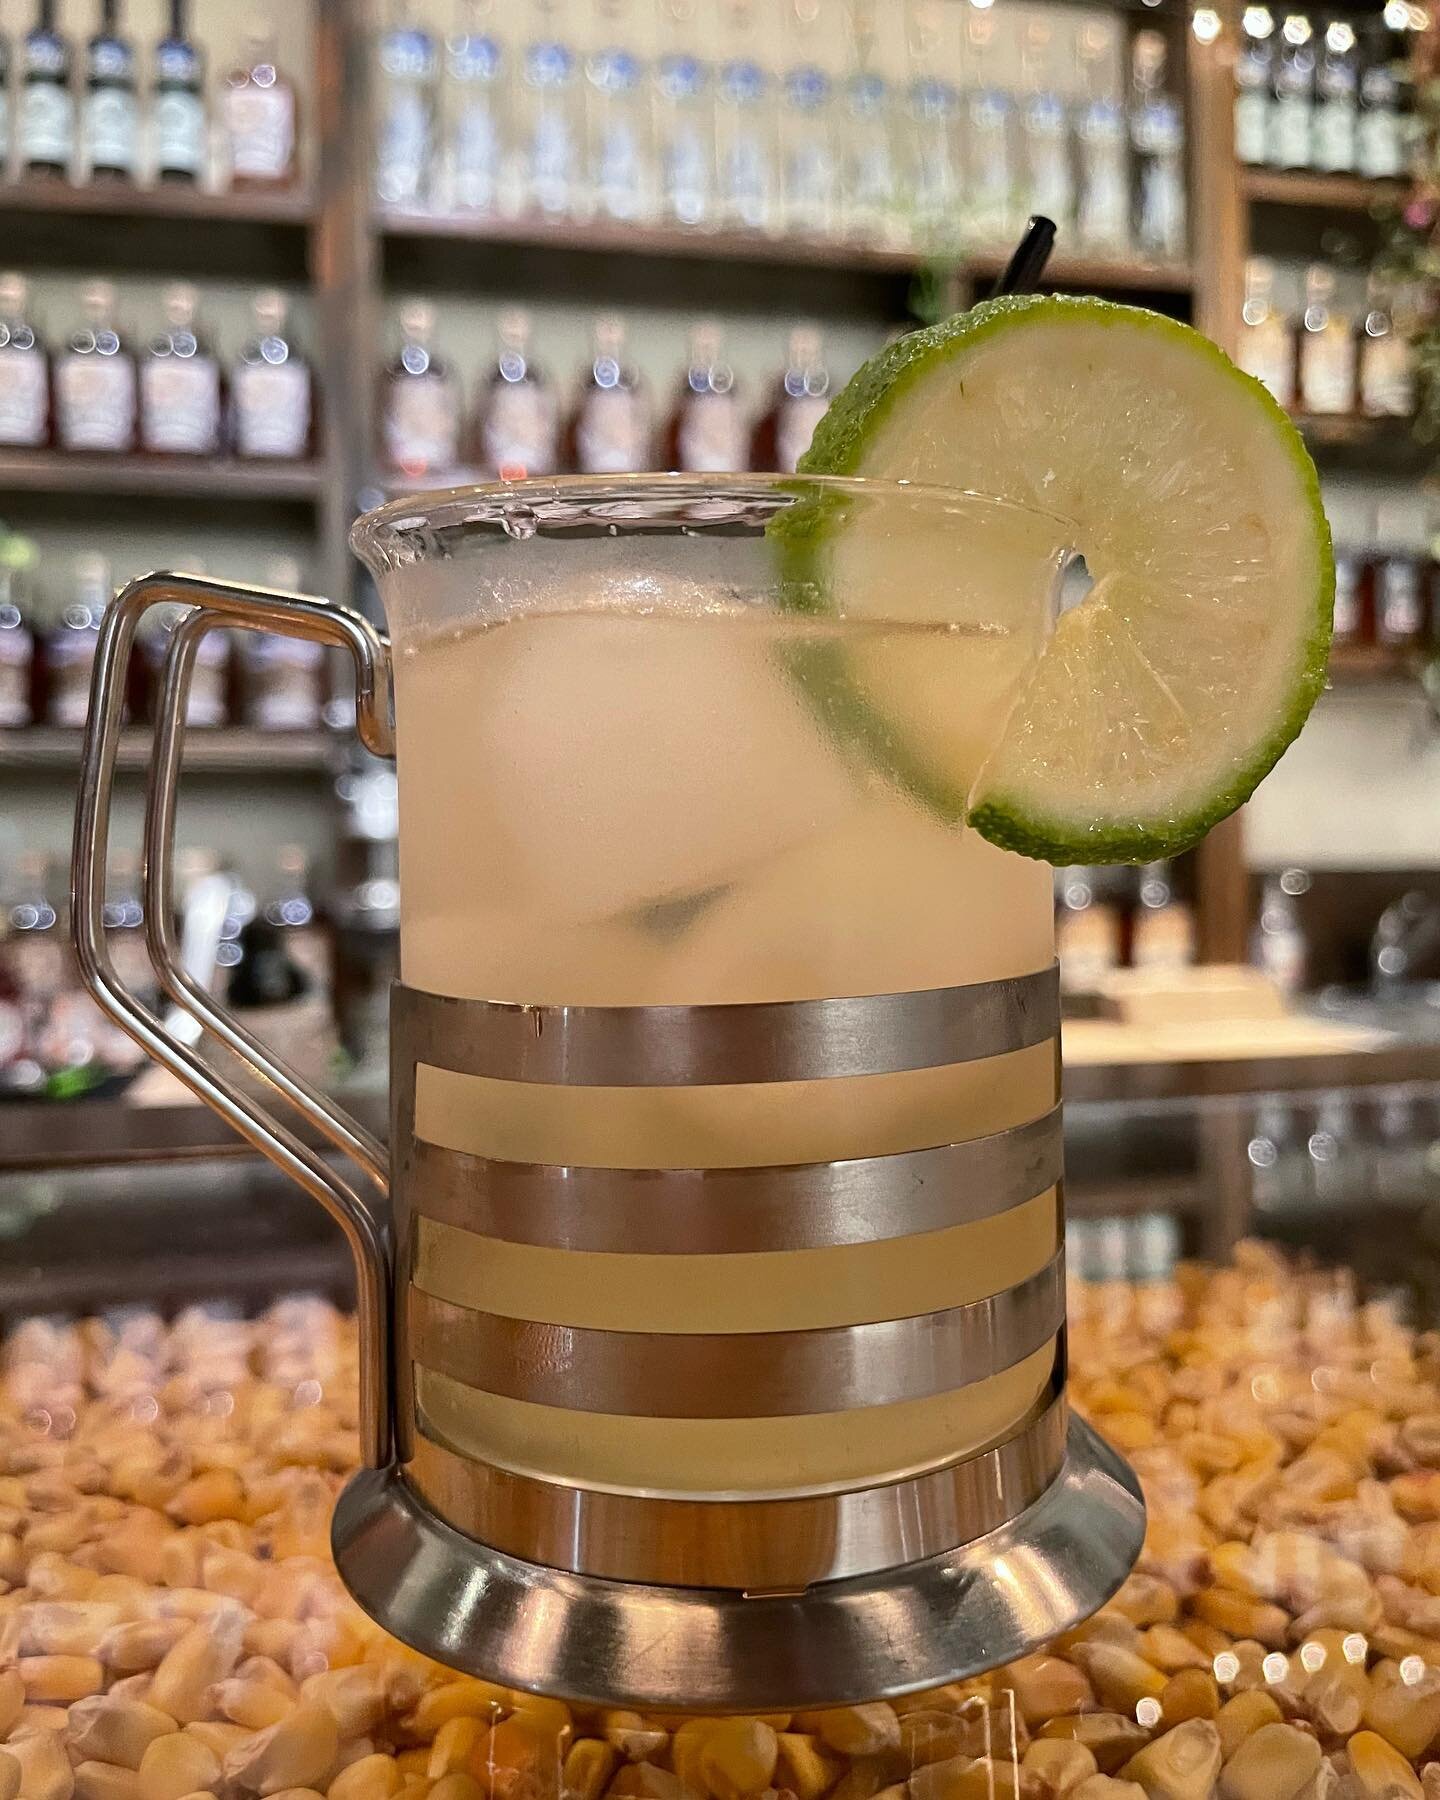 Bootleggin Mule anyone? 
Come see us and try our moonshine mule in the Lake Oswego tasting room.